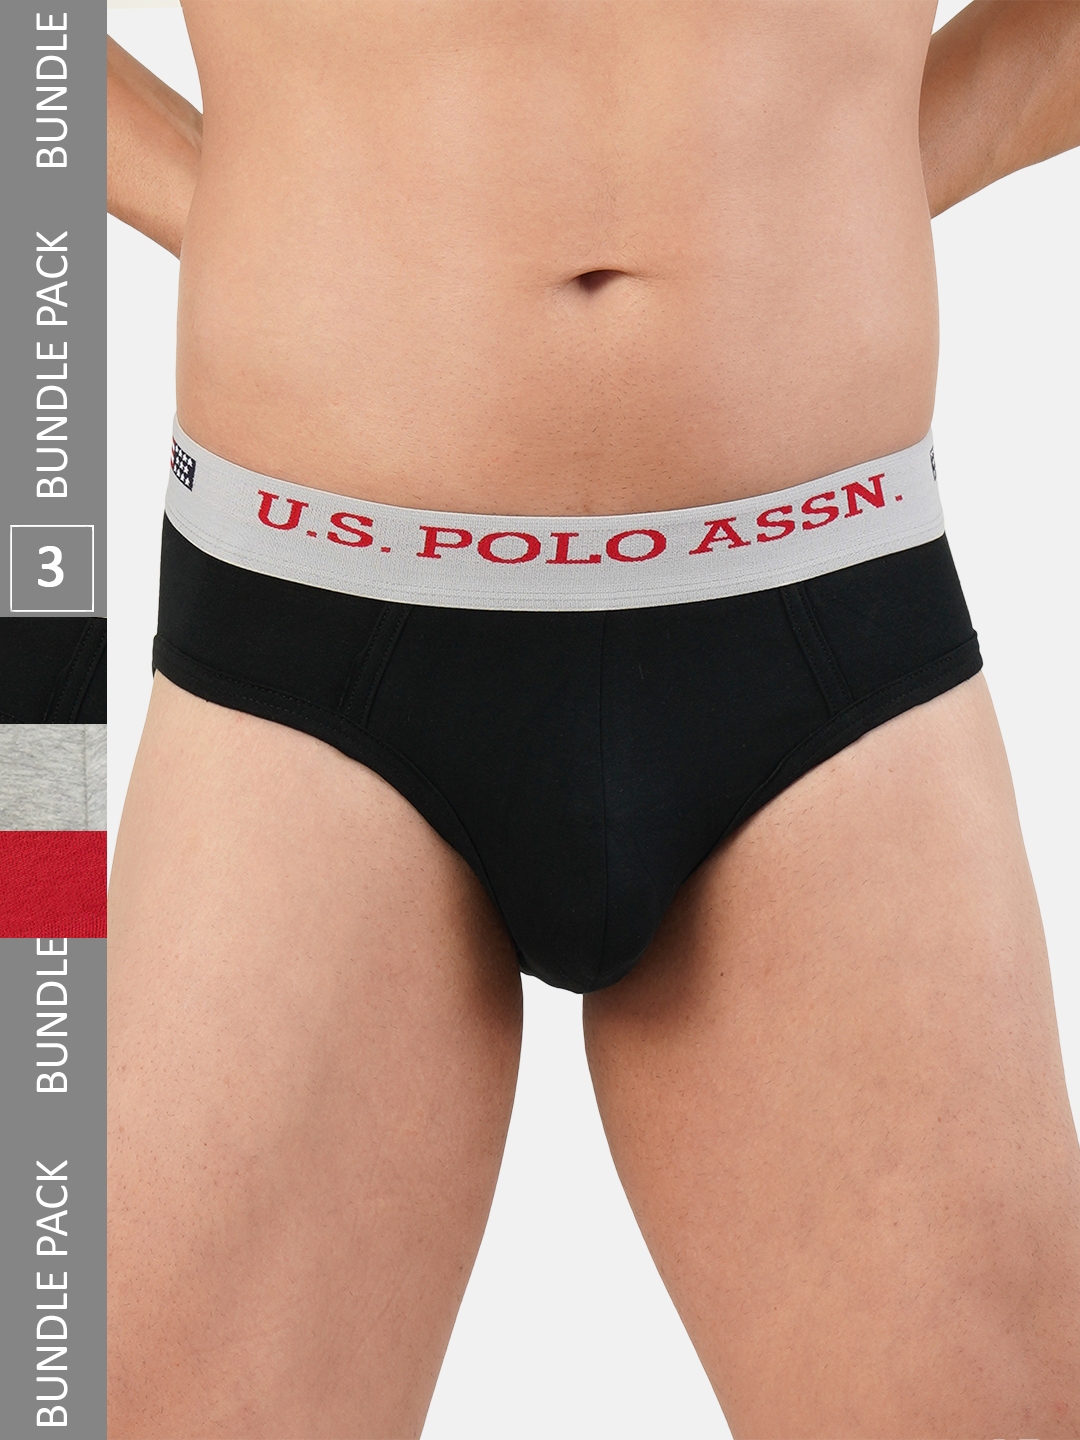 Buy U.S. Polo Assn. Men Multi Solid Cotton Briefs Pack Of 3 I005 GBR P3 -  Briefs for Men 15823074